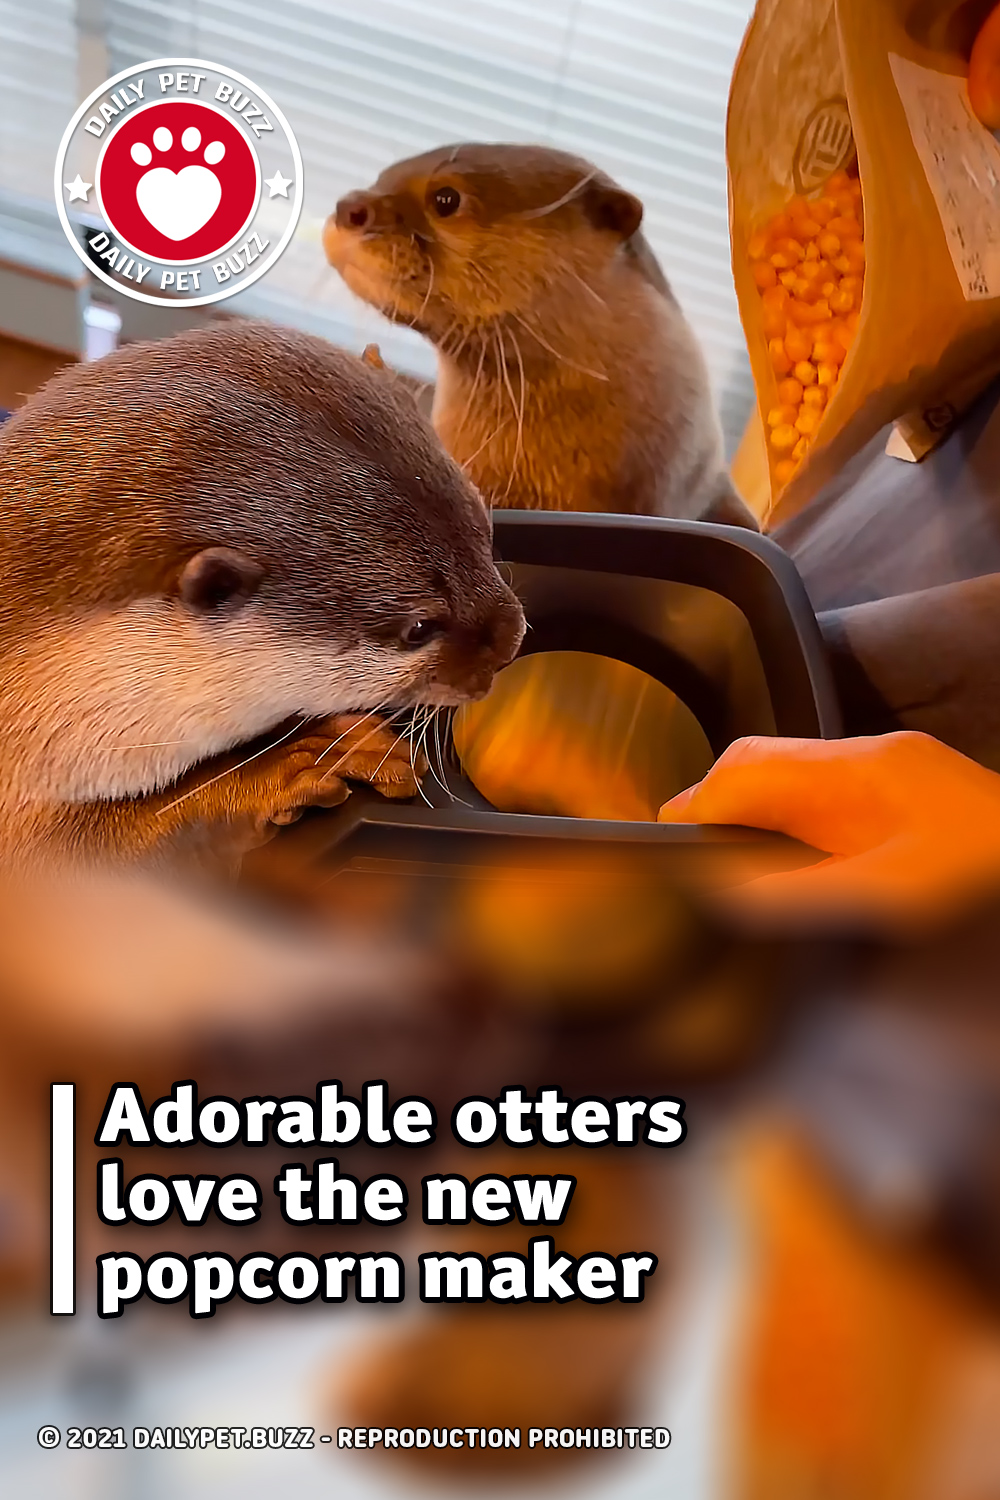 Adorable otters love the new popcorn maker